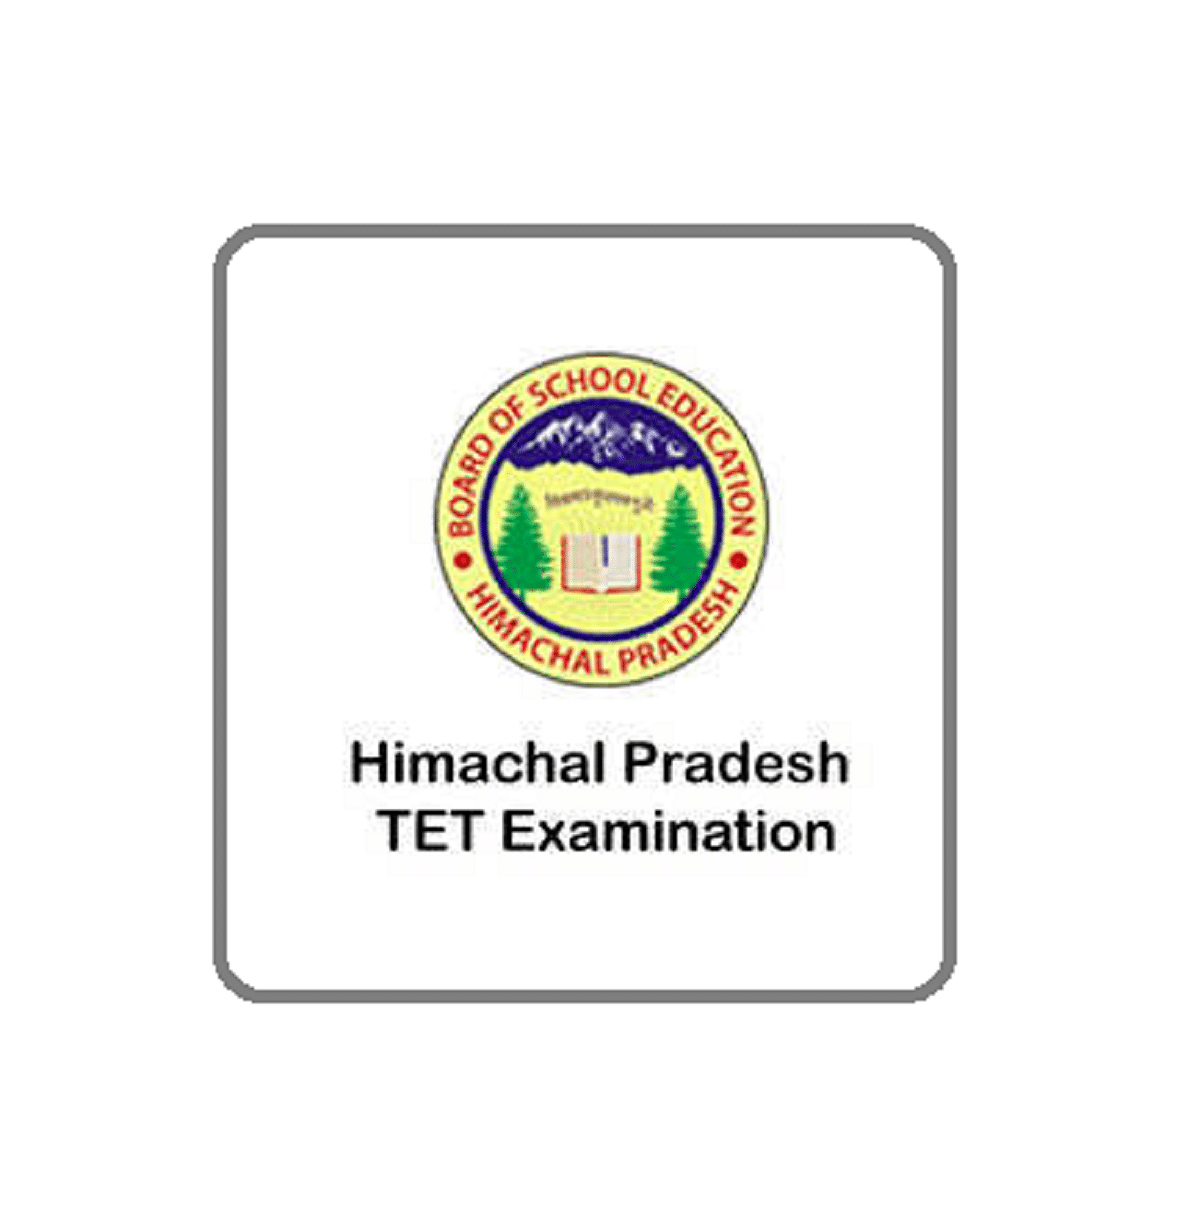 HP TET Answer Key 2019 Released, Download Here